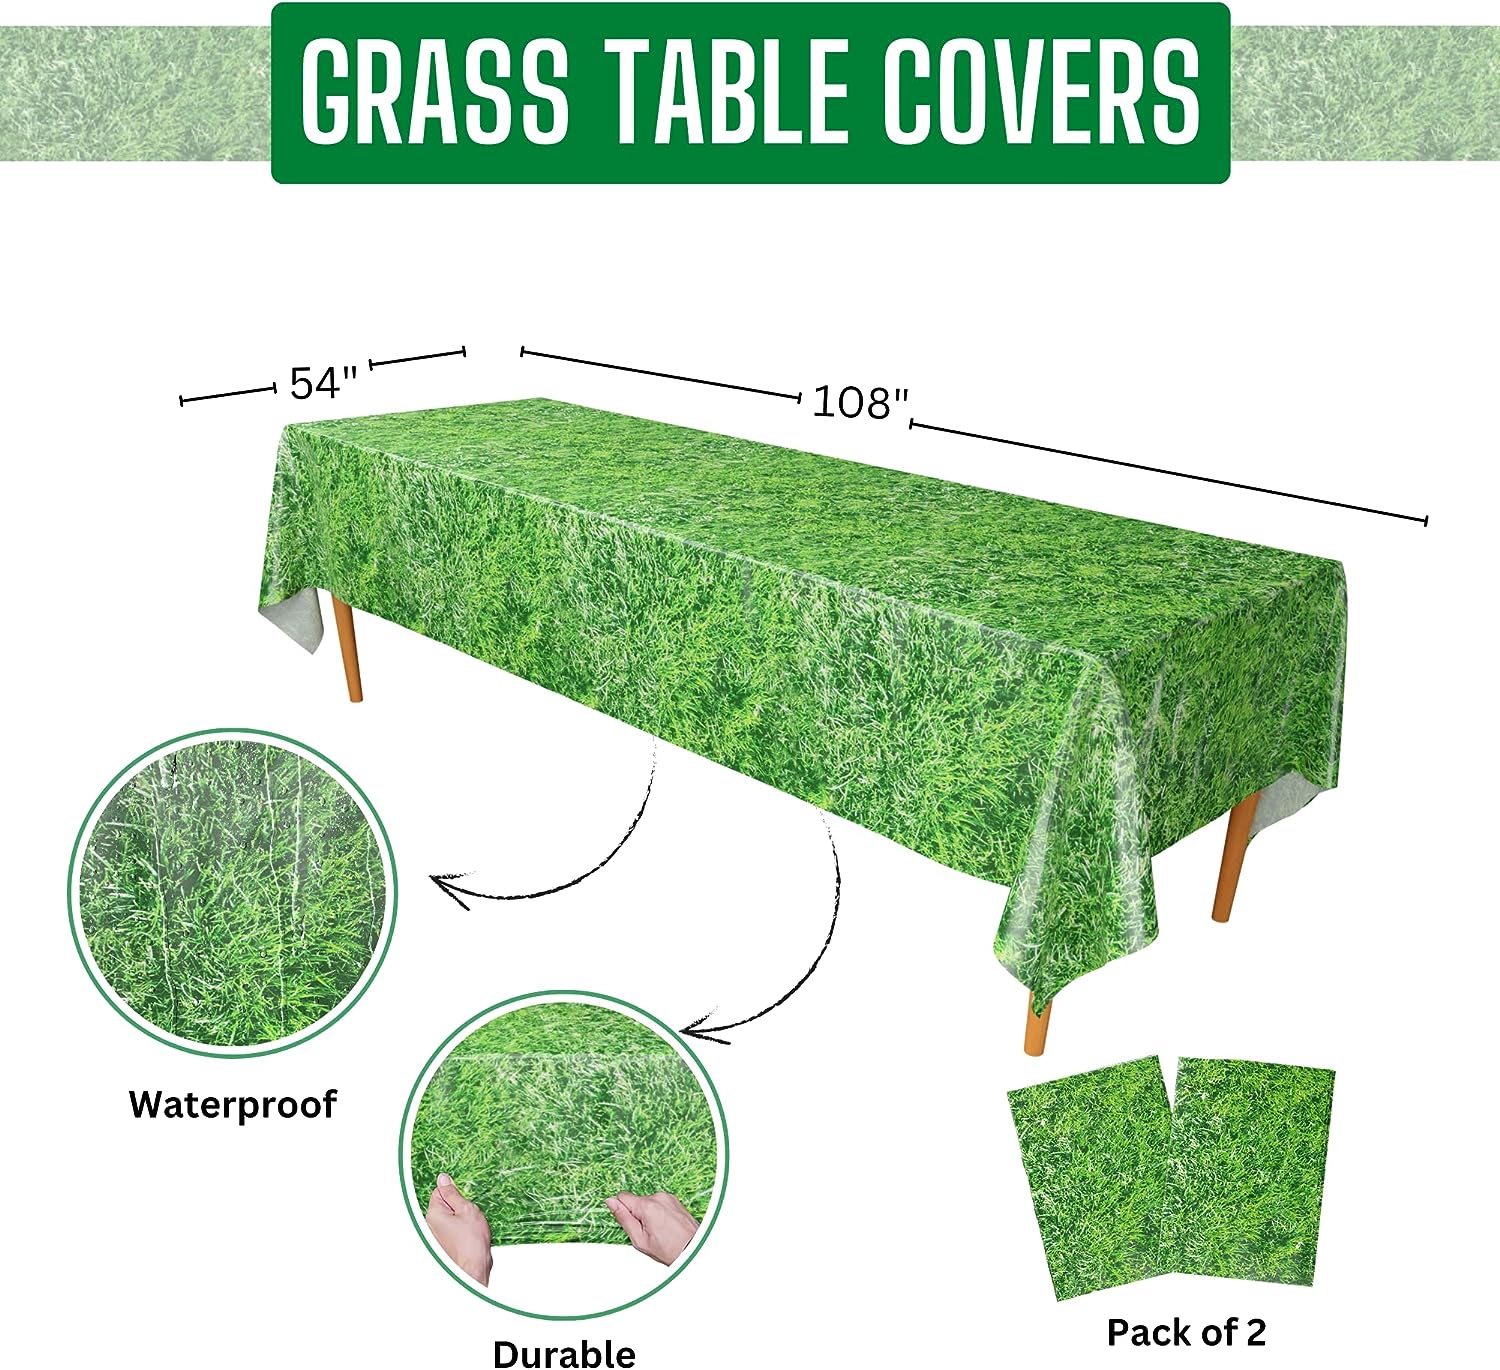 Grass Themed Table Covers with a natural green design, ideal for outdoor-themed parties or adding a touch of nature to your table setting.